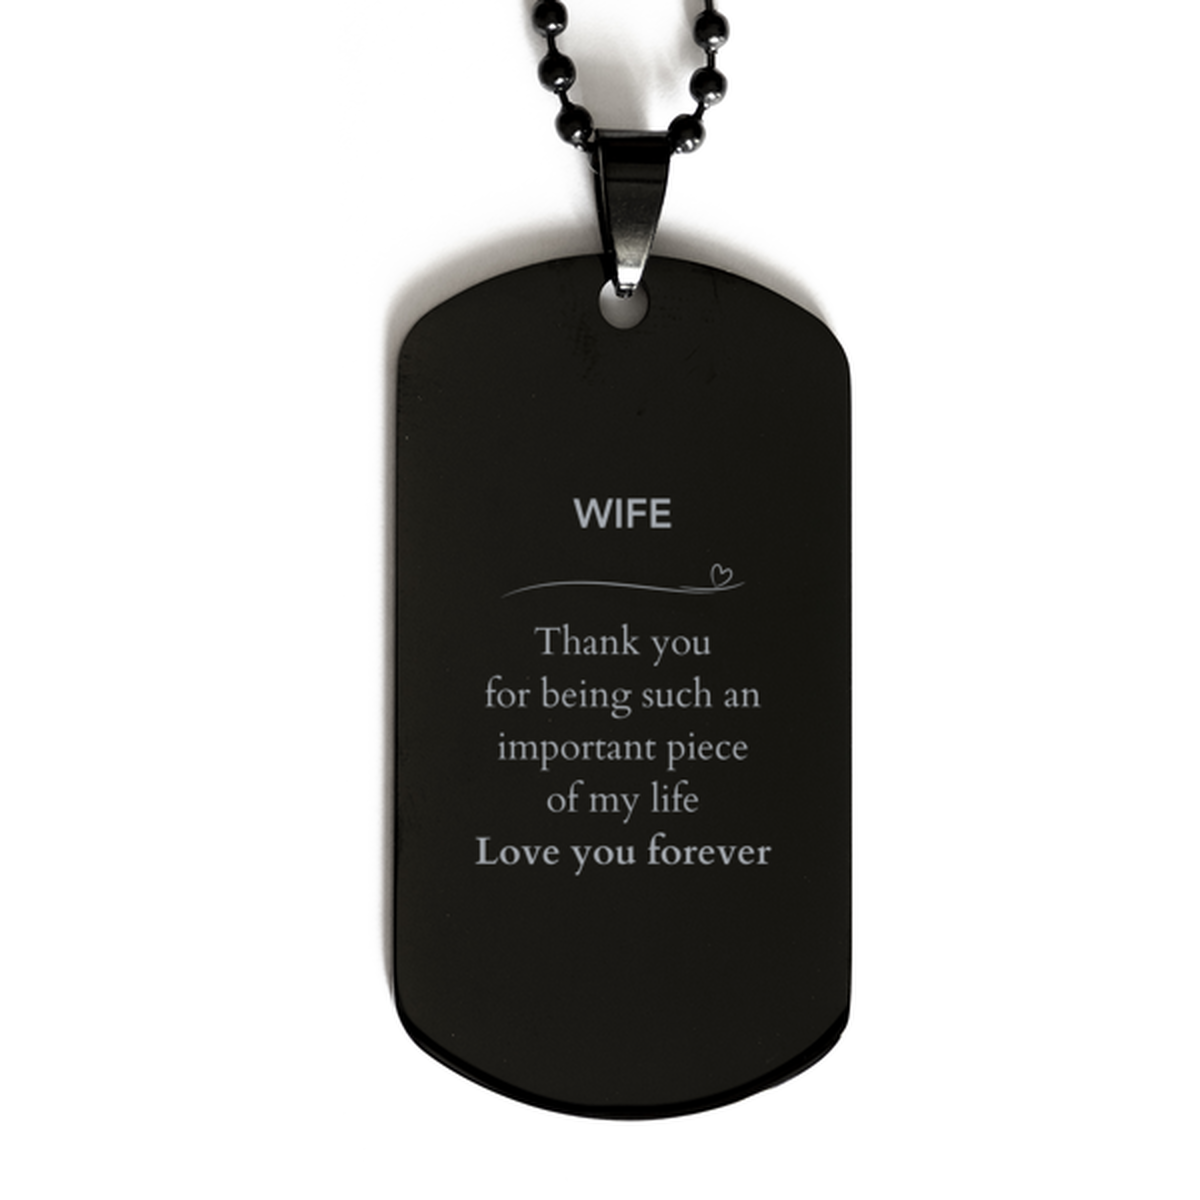 Appropriate Wife Black Dog Tag Epic Birthday Gifts for Wife Thank you for being such an important piece of my life Wife Christmas Mothers Fathers Day